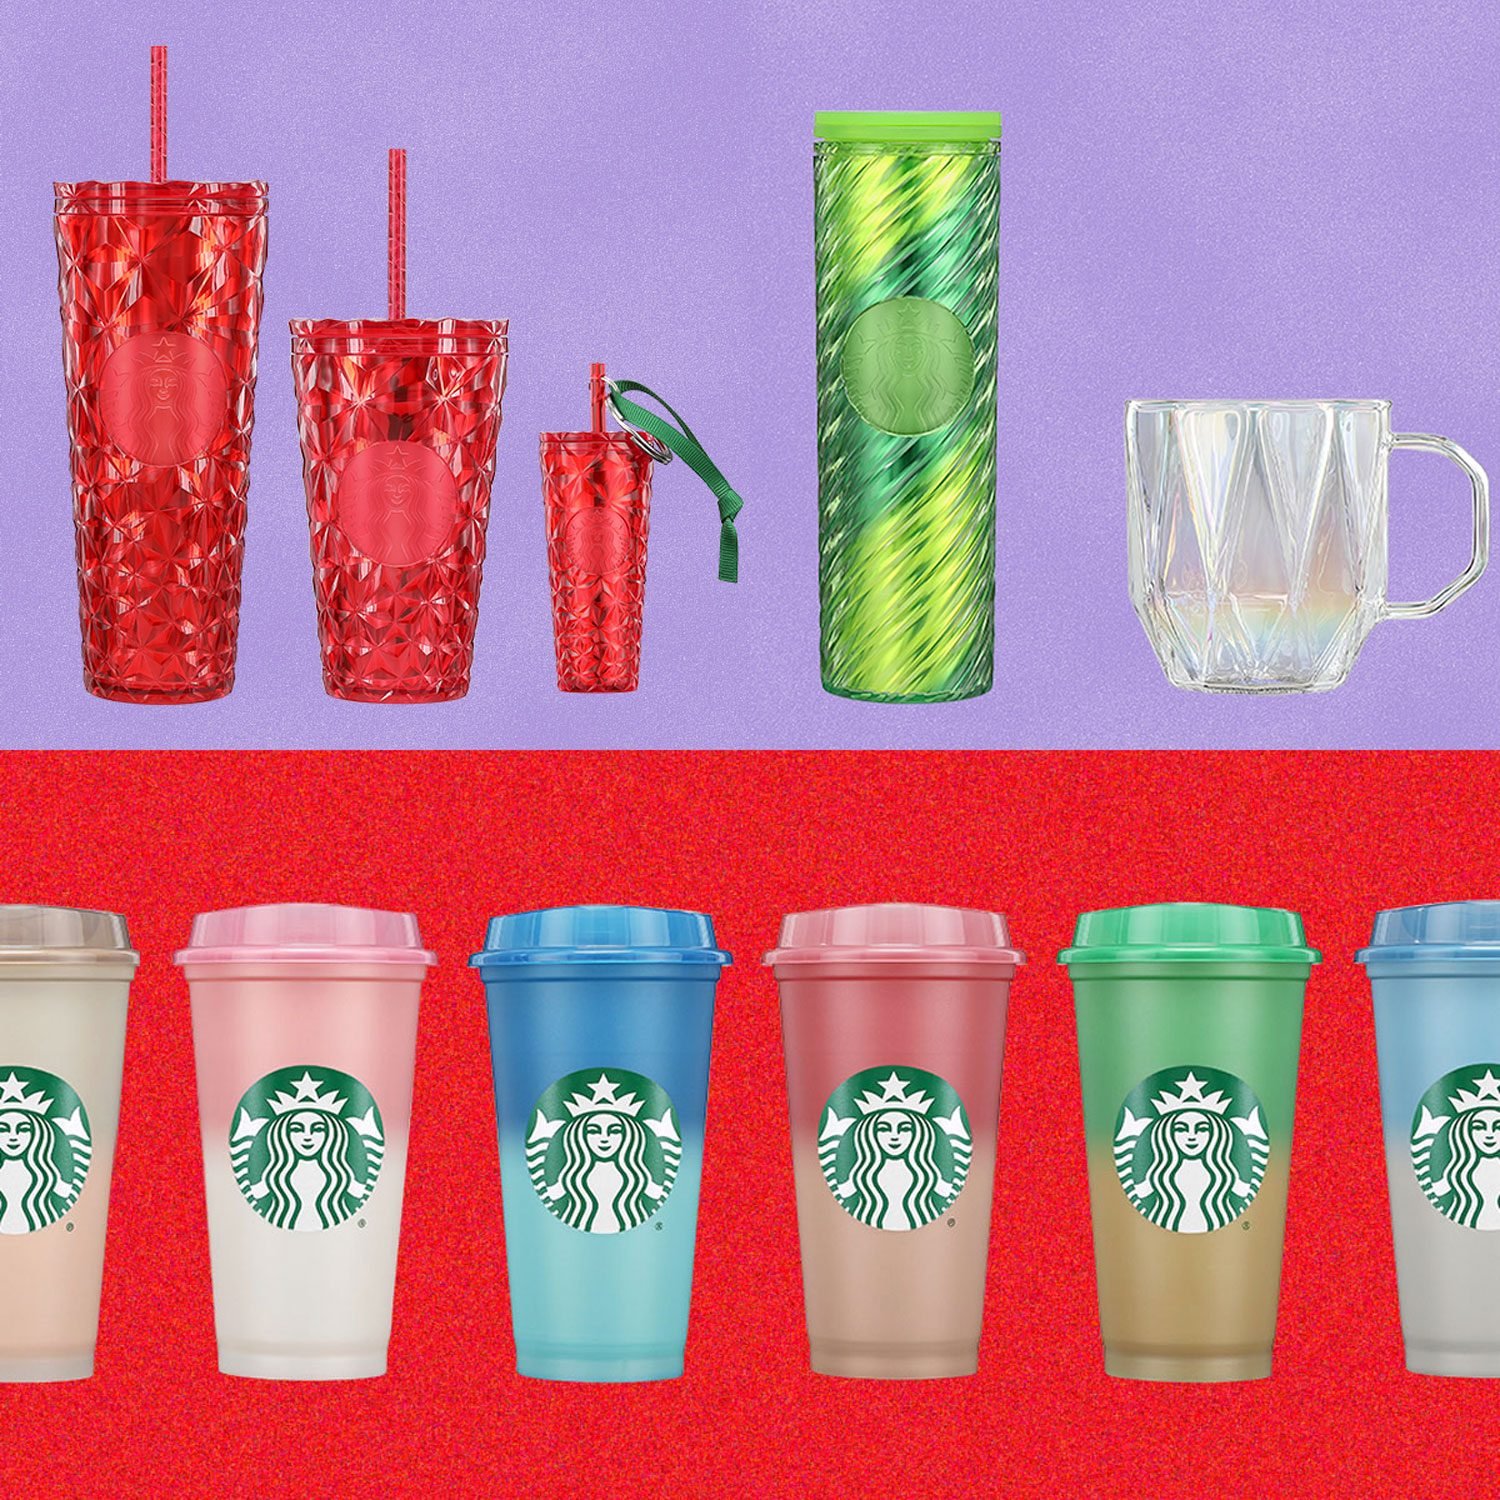 https://www.tasteofhome.com/wp-content/uploads/2023/10/Starbucks-Holiday-Cup-Lineup-Courtesy-Starbucks-3-DH-TOH.jpg